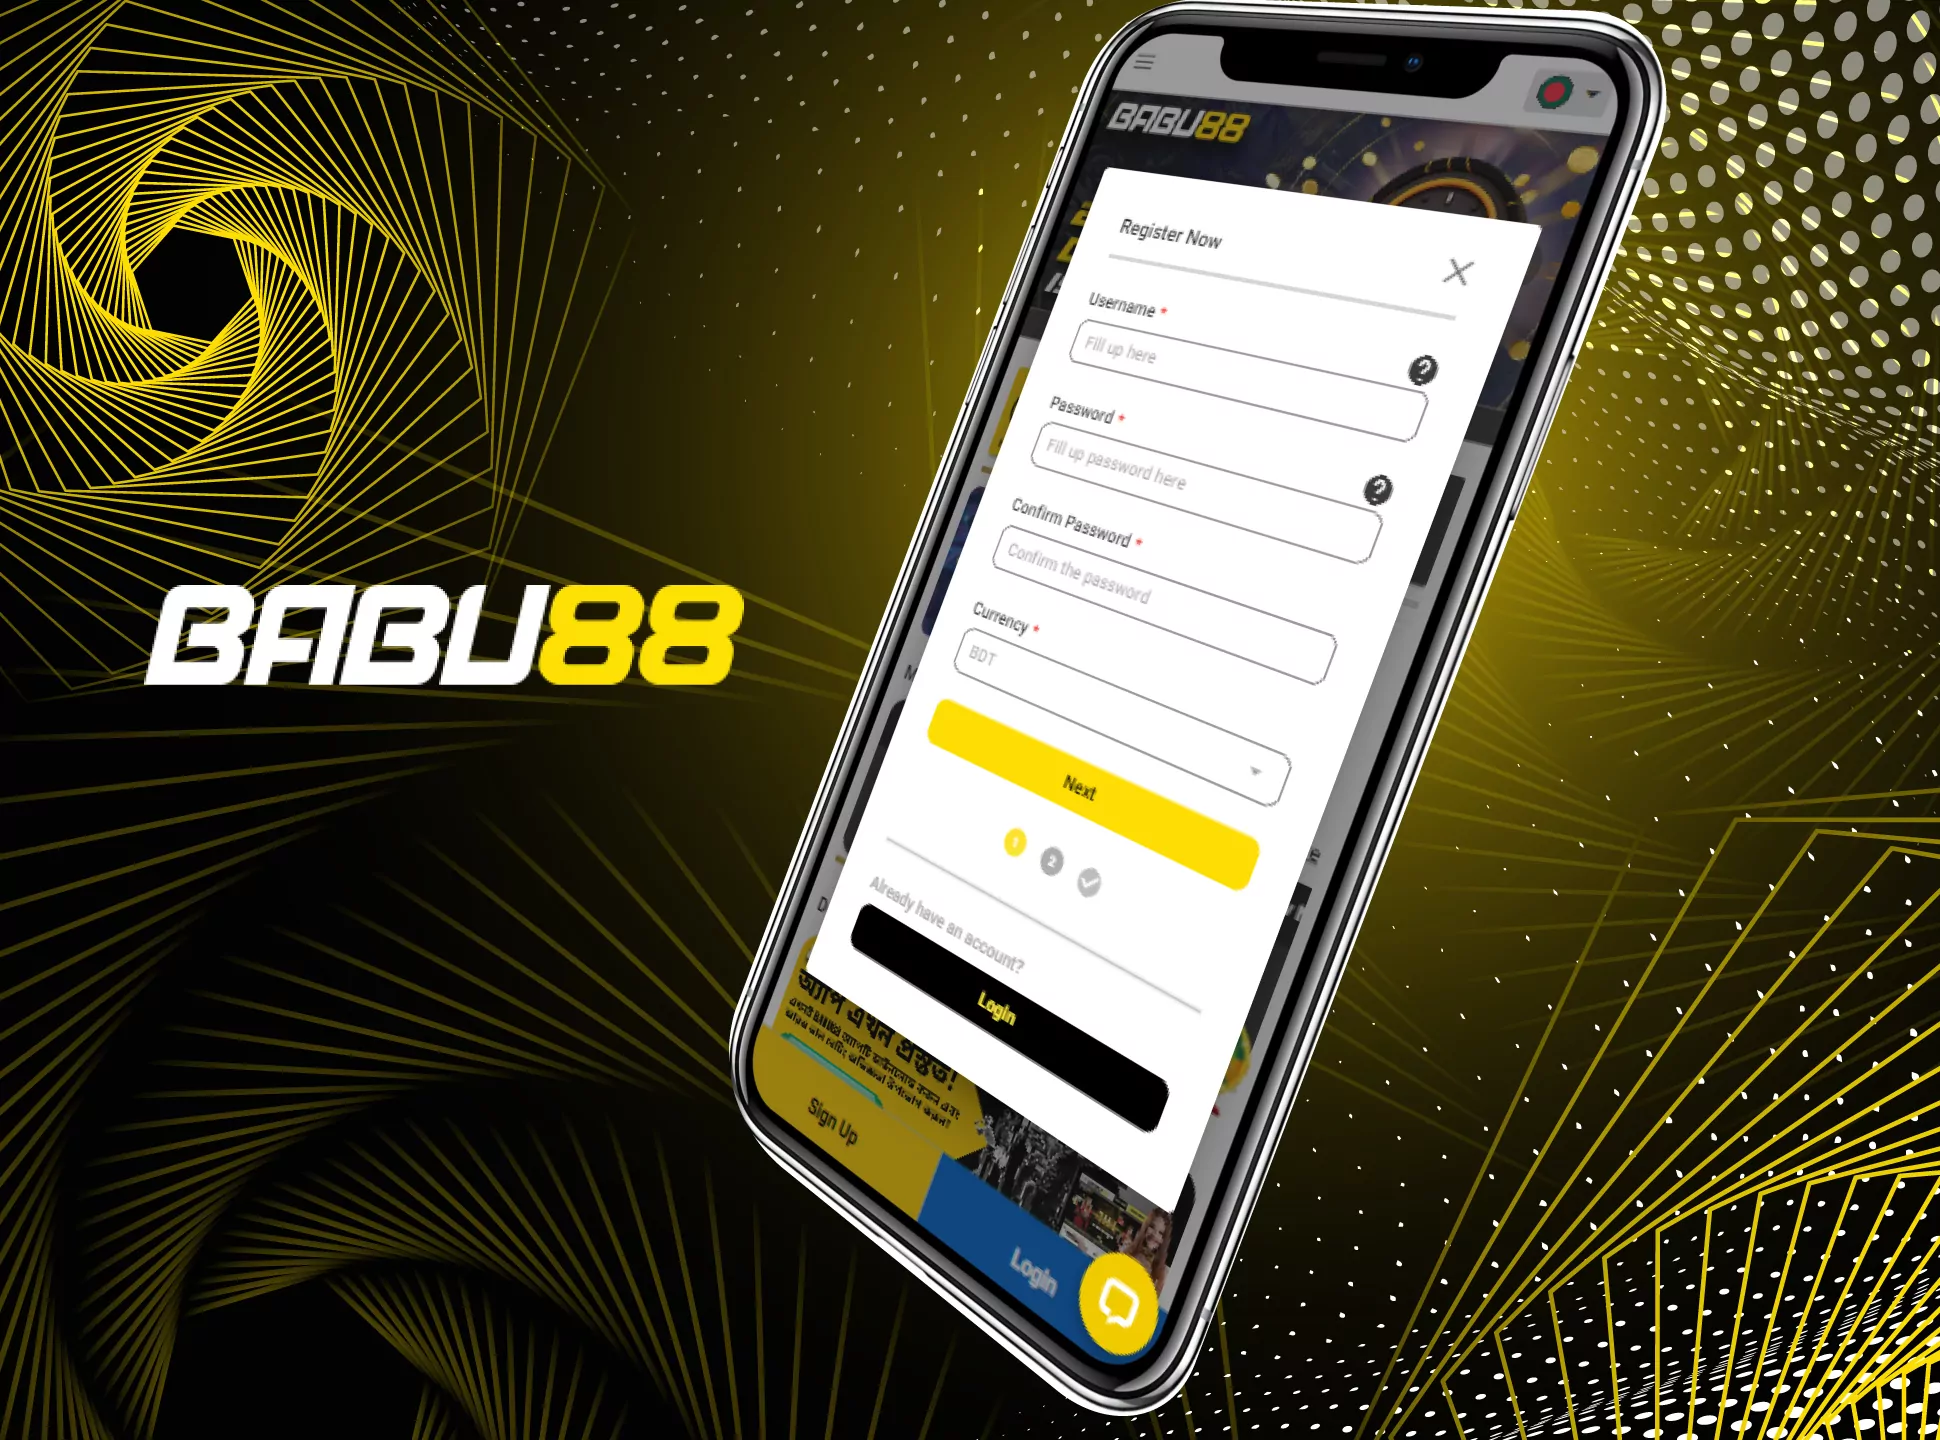 Sign up for Babu88 via your smartphone.